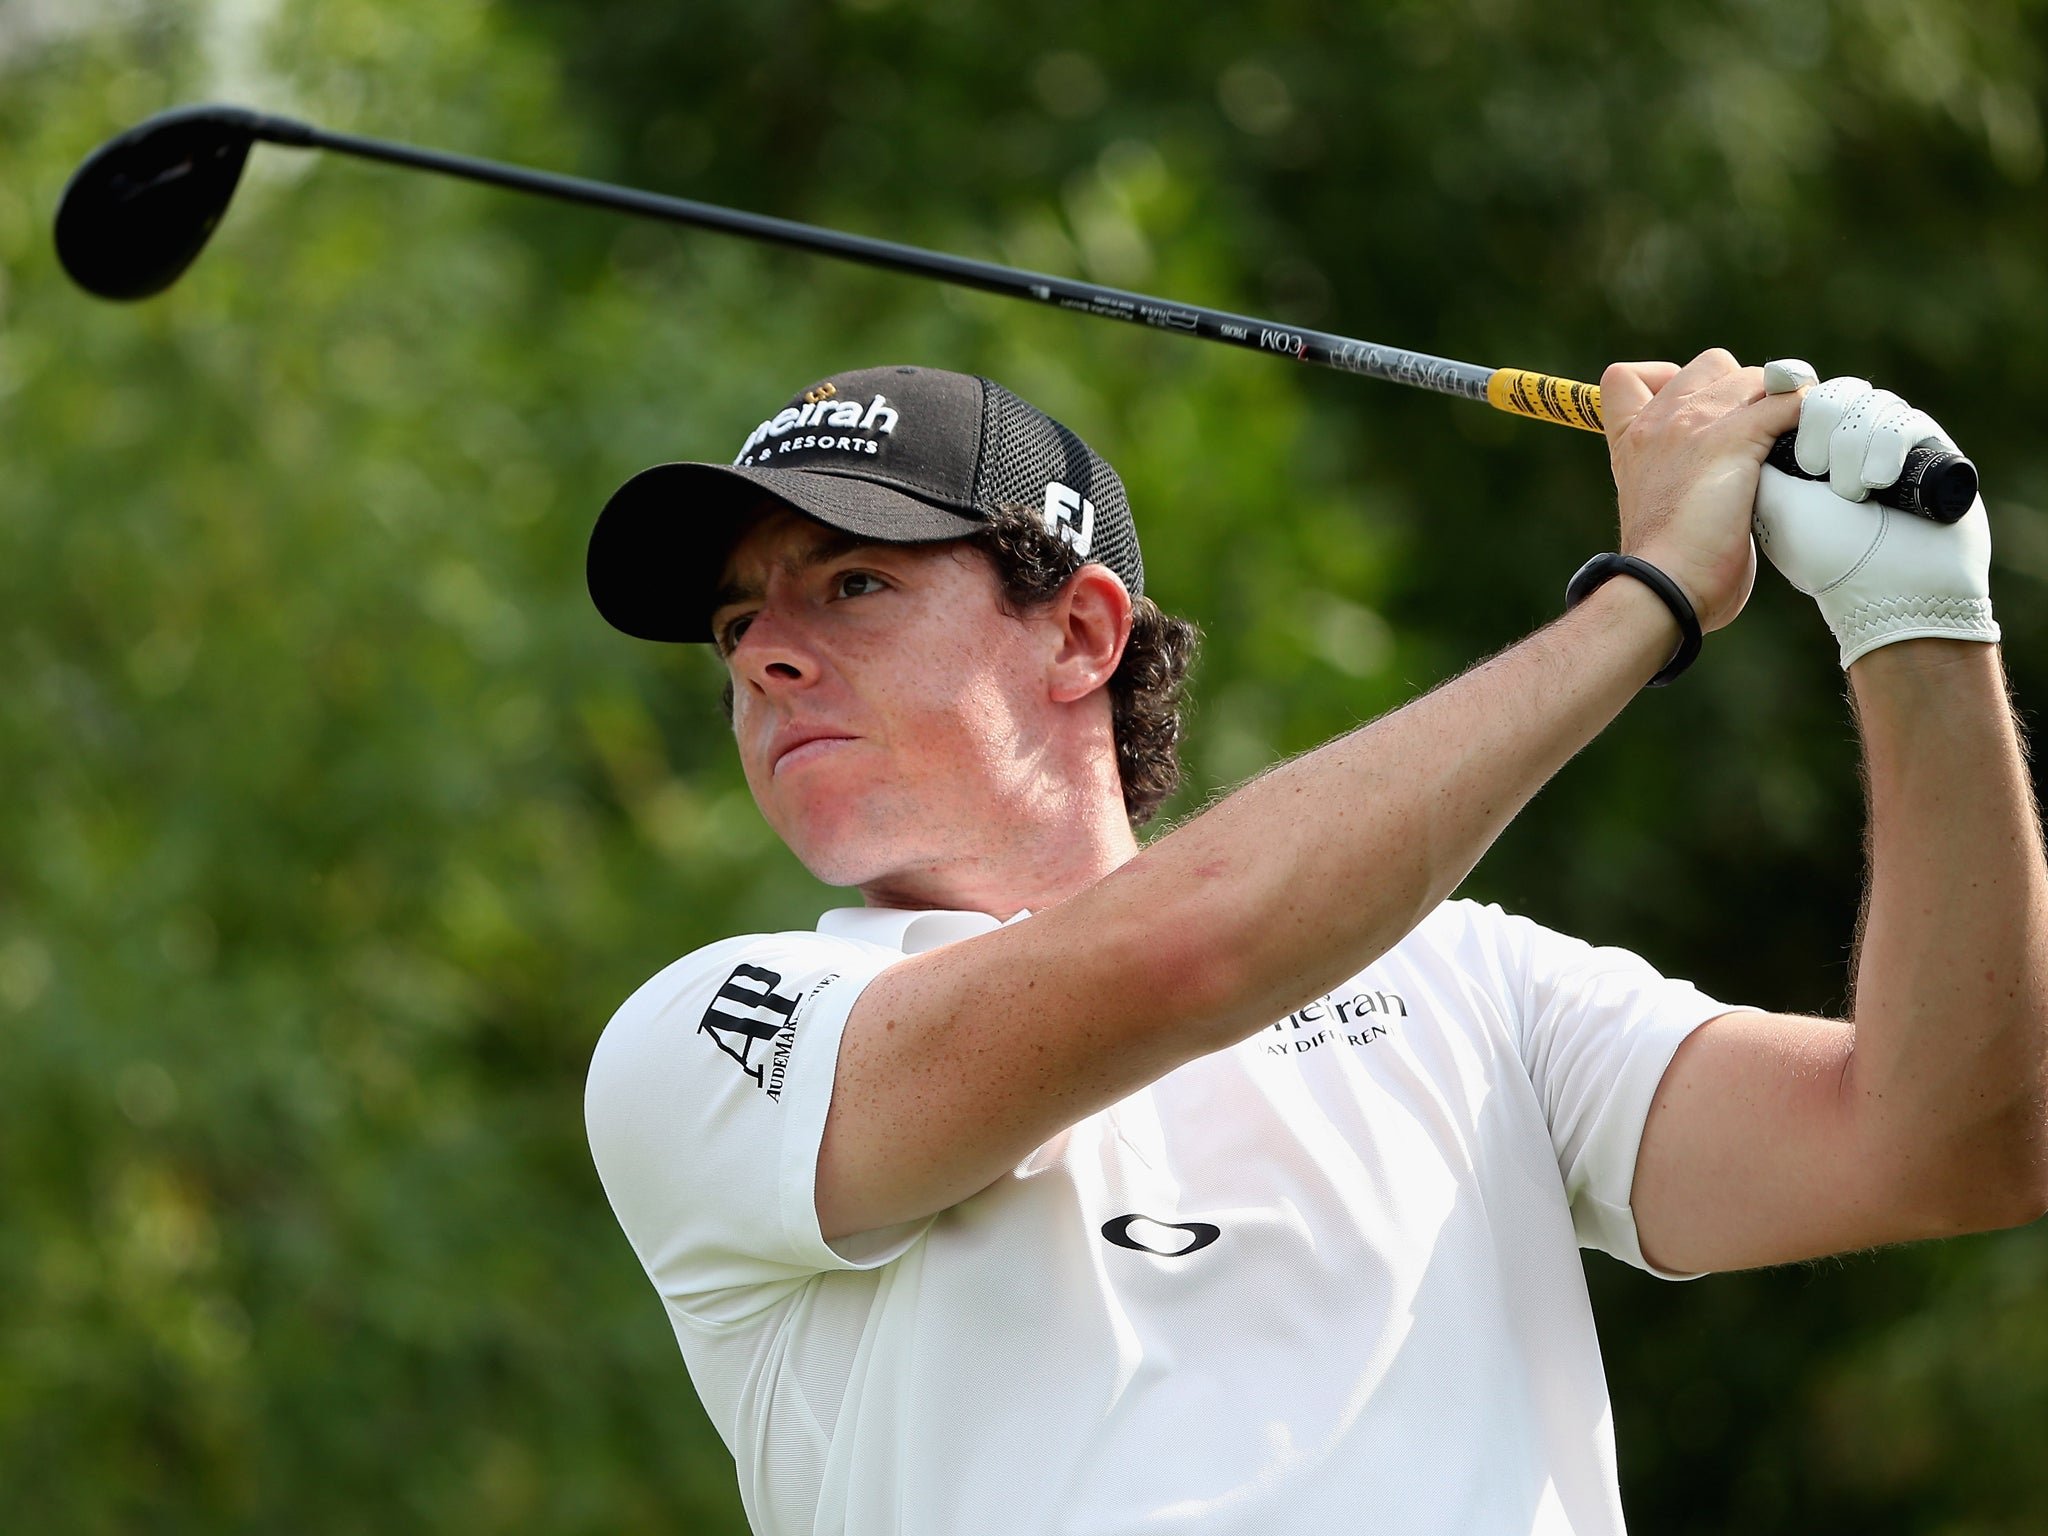 Rory McIlroy shot a round of 67 in Dubai yesterday